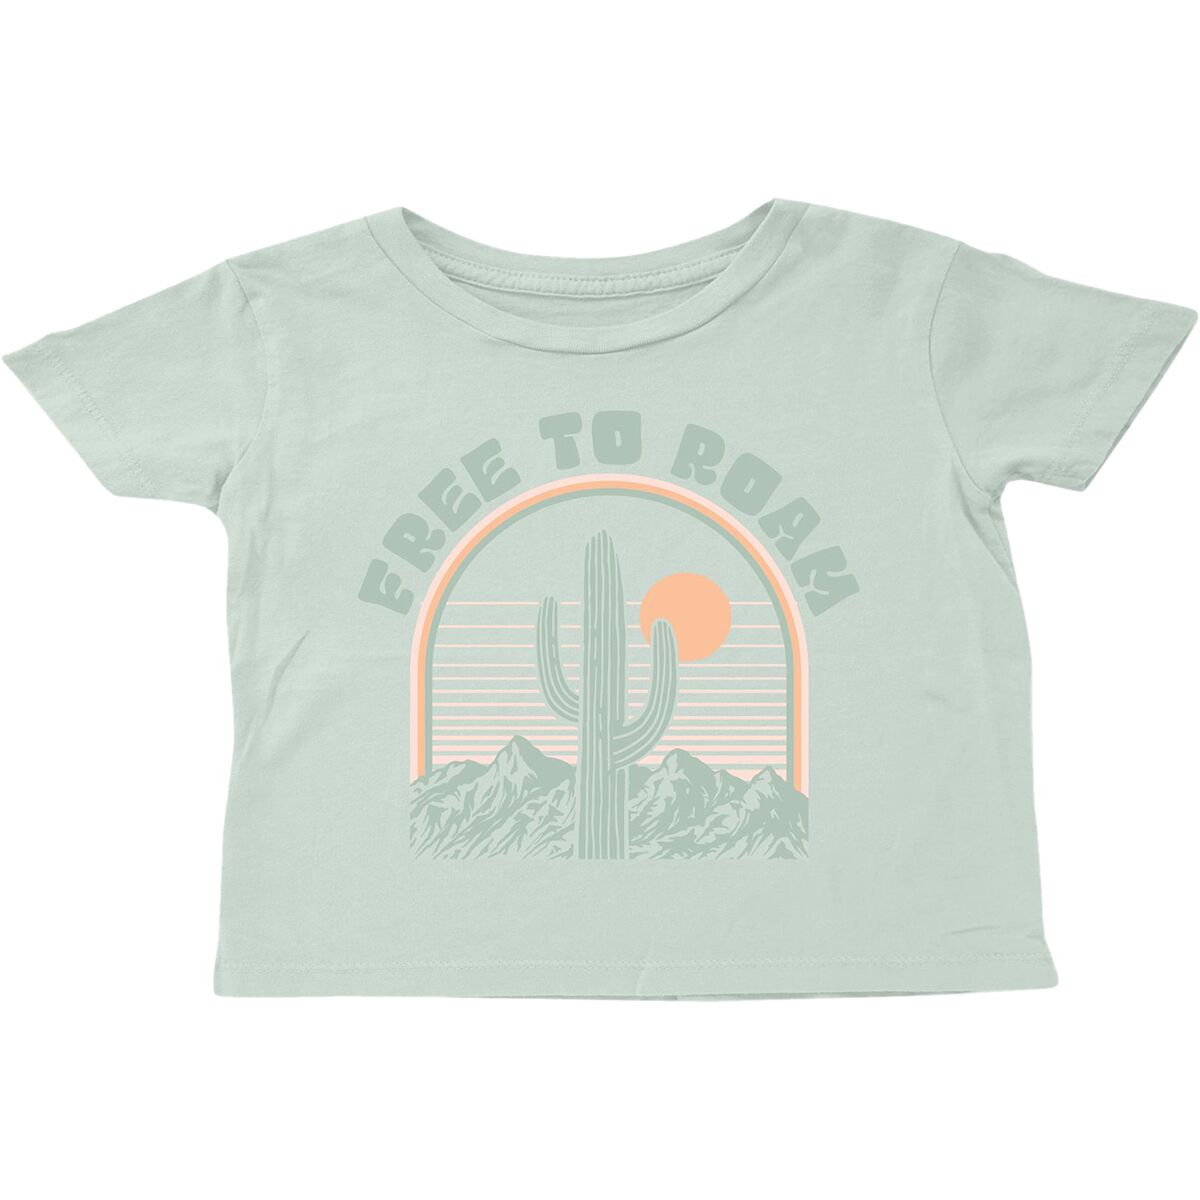 Tiny Whales Free To Roam Boxy T-Shirt - Toddlers'